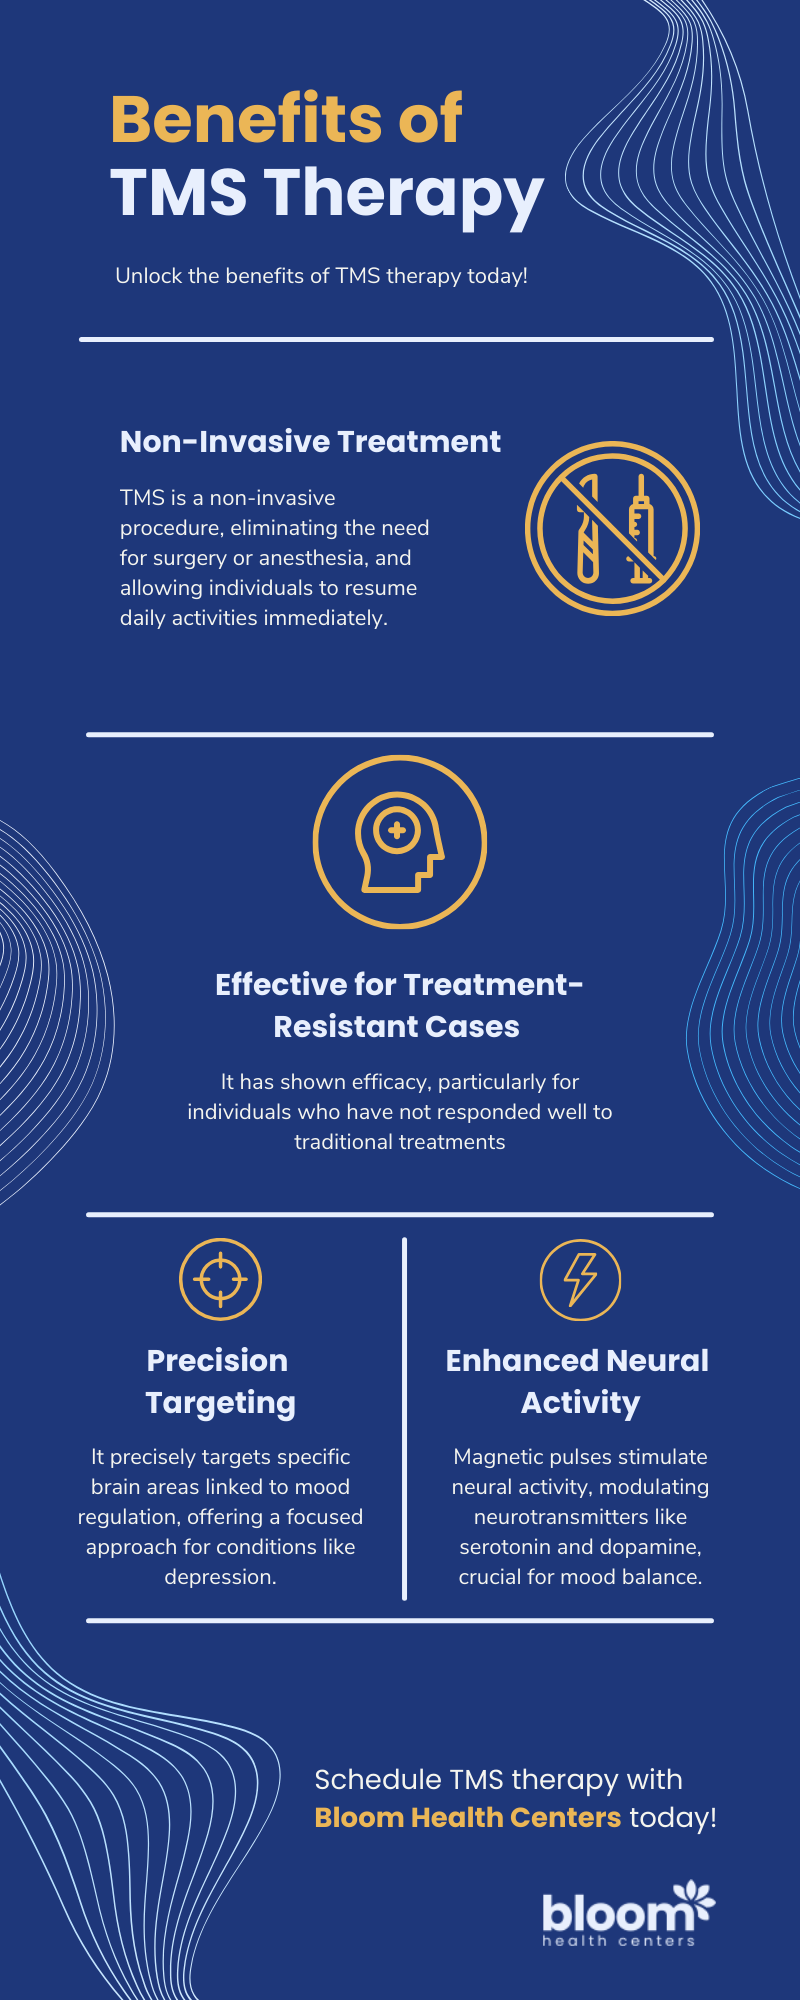 Benefits of TMS Therapy Infographic